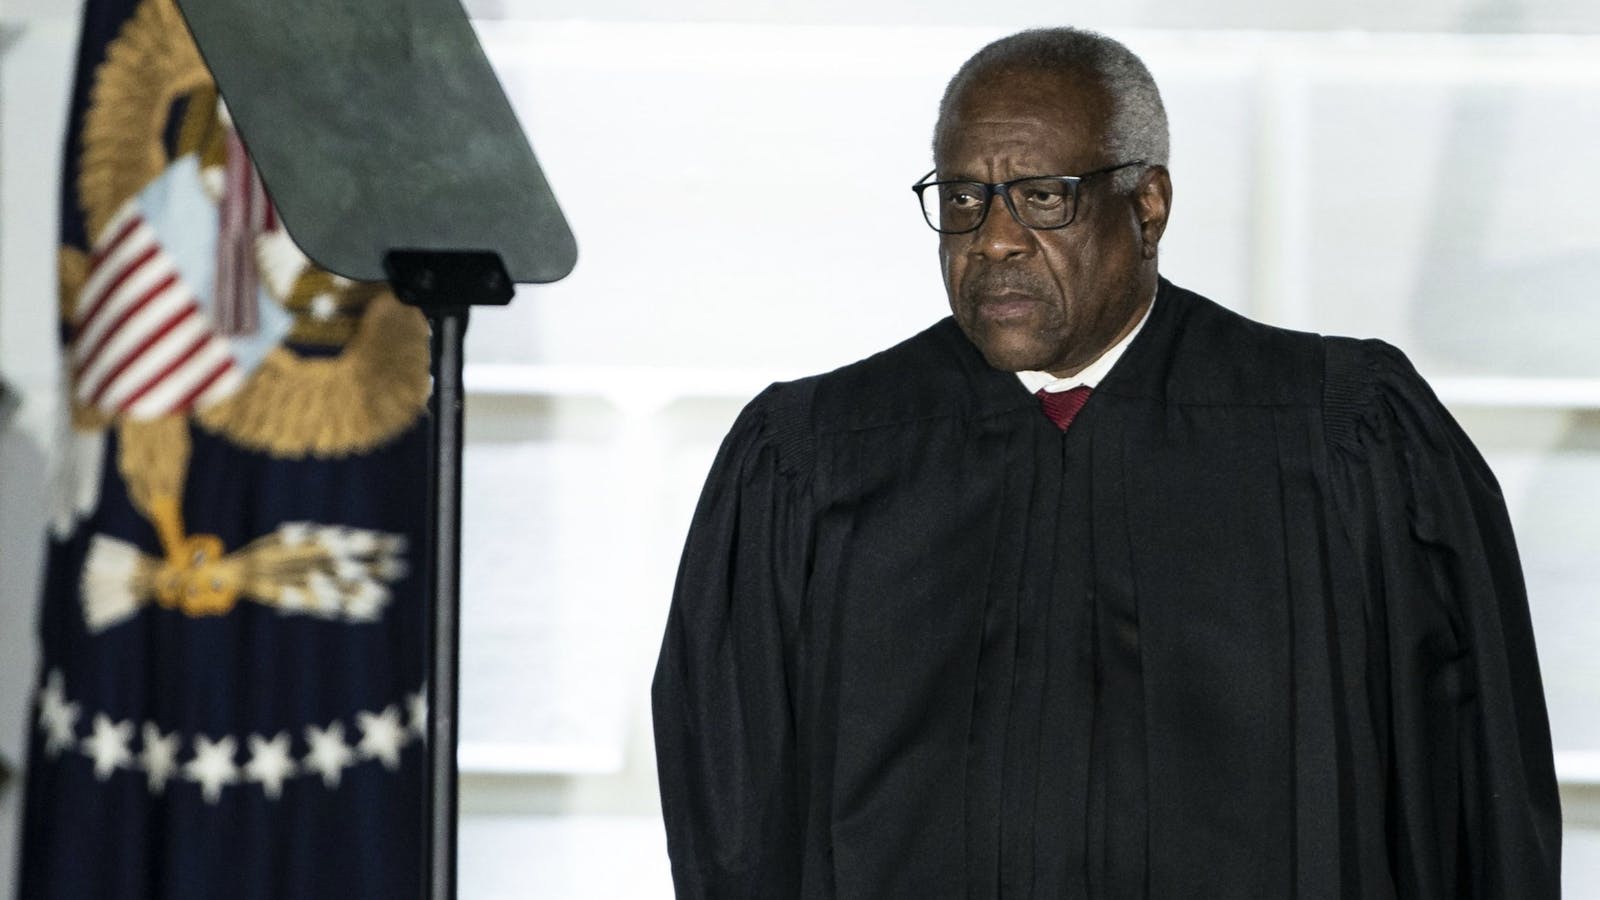 Supreme Court Justice Clarence Thomas. Photo by Bloomberg.